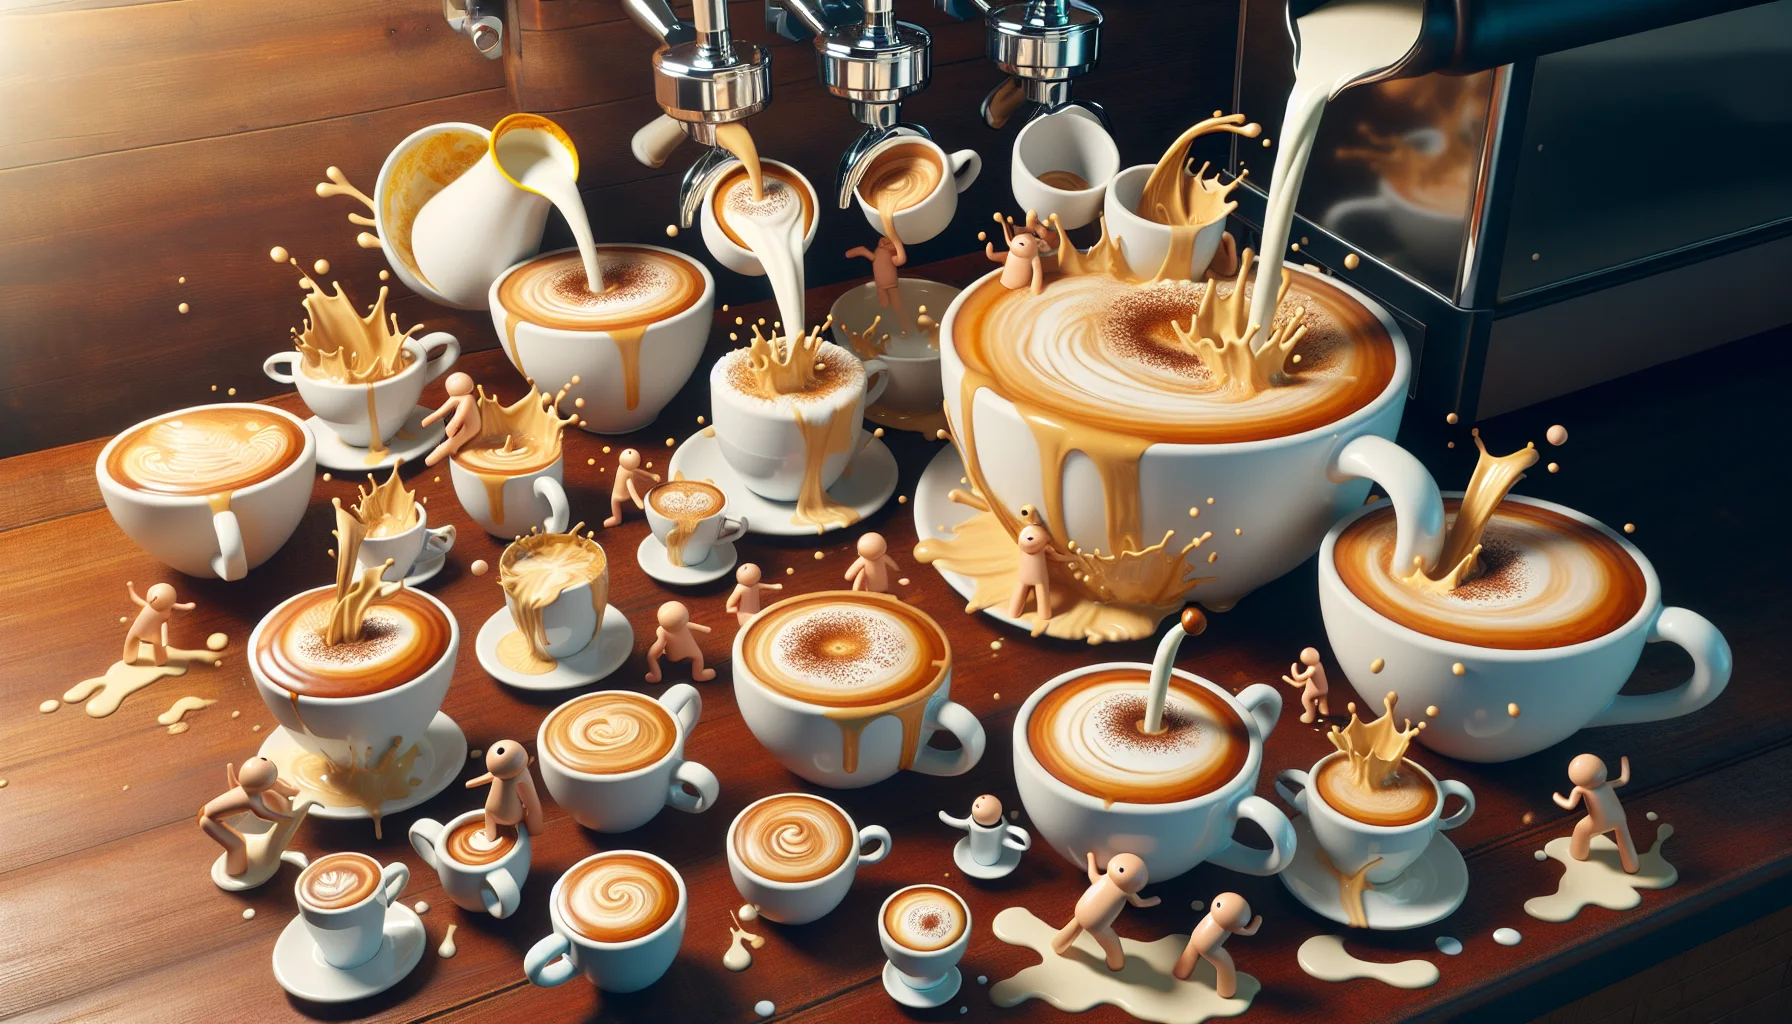 Generate an amusing yet realistic scene of a café setup. Picture this: a group of cappuccino cups are frolicking around on the café table, as if they have come alive. Various sized cappuccino cups, from tiny to gigantic, are playing tag, making it a seemingly friendly competition among them. Some are filled with frothy golden brown cappuccino, while others are just about to be filled by an automatic coffee machine pouring out cappuccino. There should be splashes of coffee and milk creating a joyful and lively mess. The whole animated scene should express a sense of playfulness and invite viewers to take part in the zestful coffee experience.